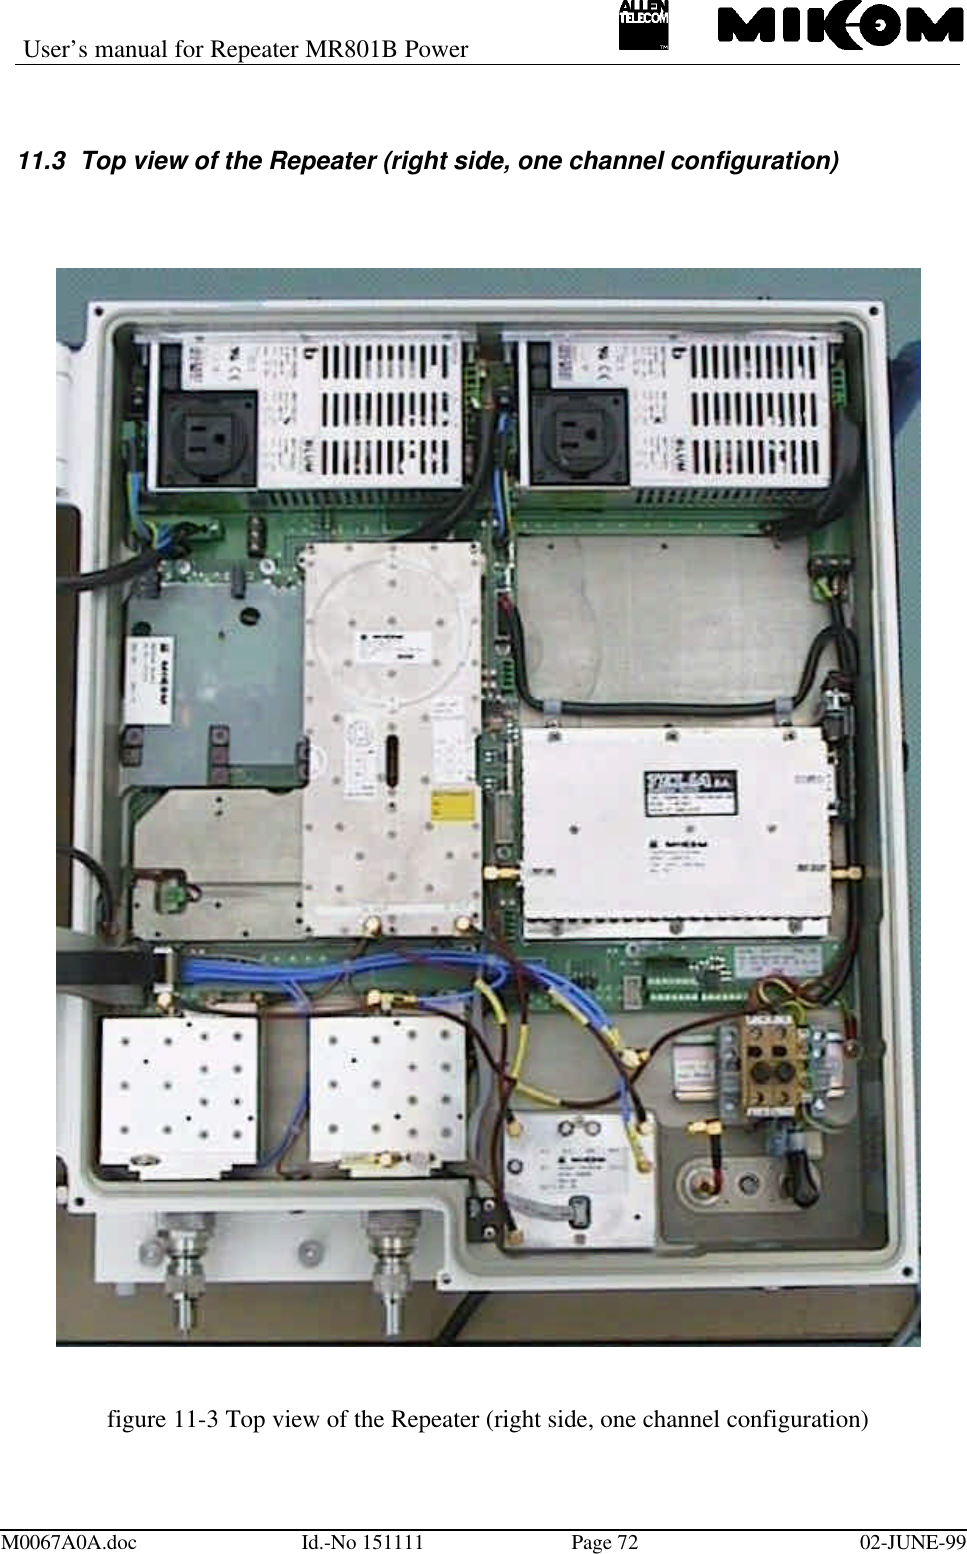 User’s manual for Repeater MR801B PowerM0067A0A.doc Id.-No 151111 Page 72 02-JUNE-9911.3 Top view of the Repeater (right side, one channel configuration)figure 11-3 Top view of the Repeater (right side, one channel configuration)